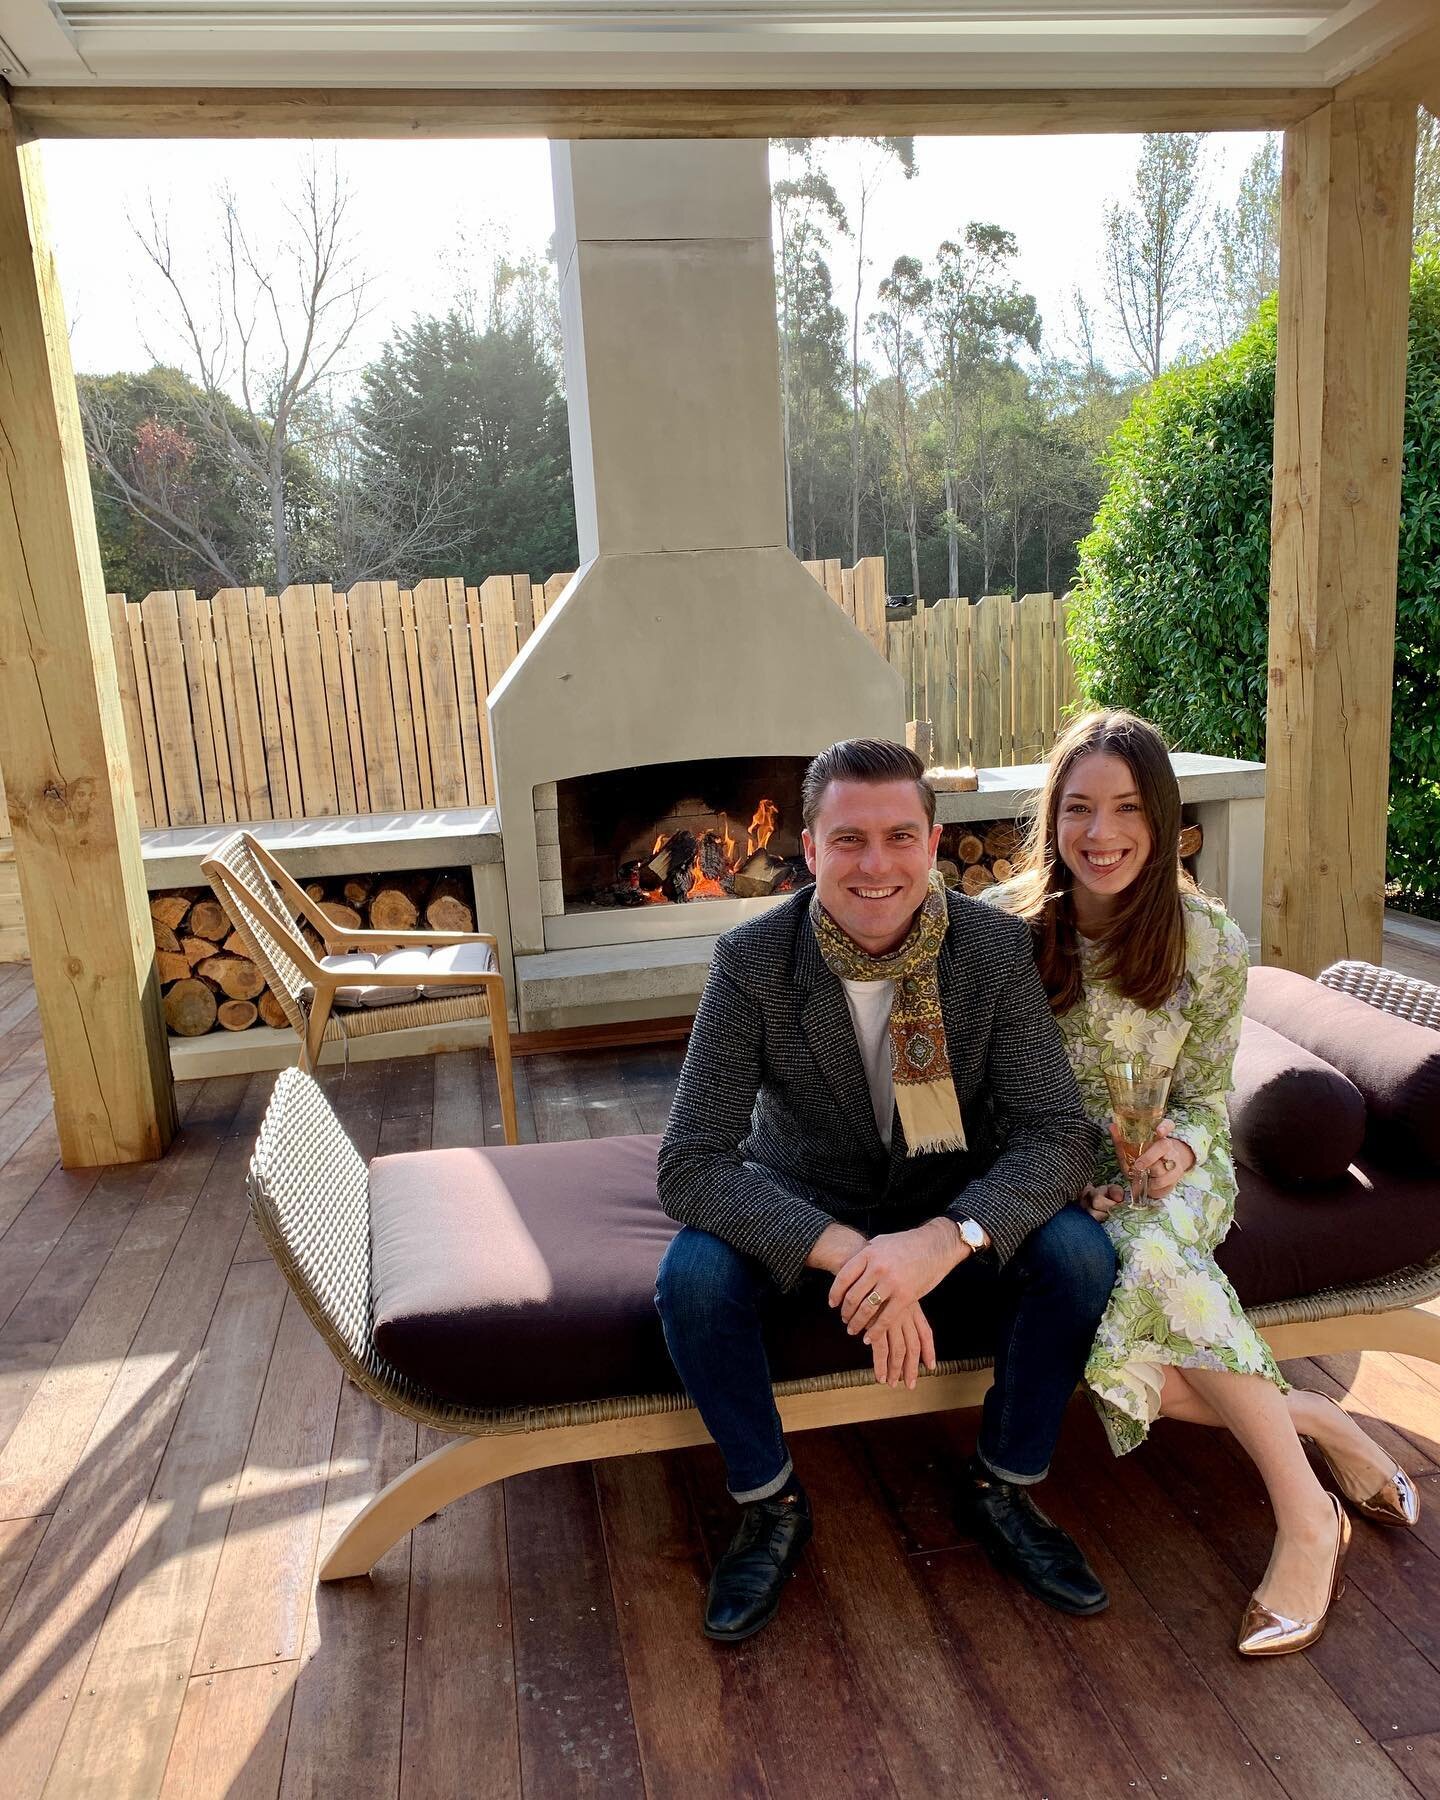 Thrilled to share I&rsquo;m getting back on the tools and selling real estate on Waiheke Island with Kelsey. I'll still be training and calling auctions, but excited to work alongside my wife and spend more time island-side! Watch this space. #waihek